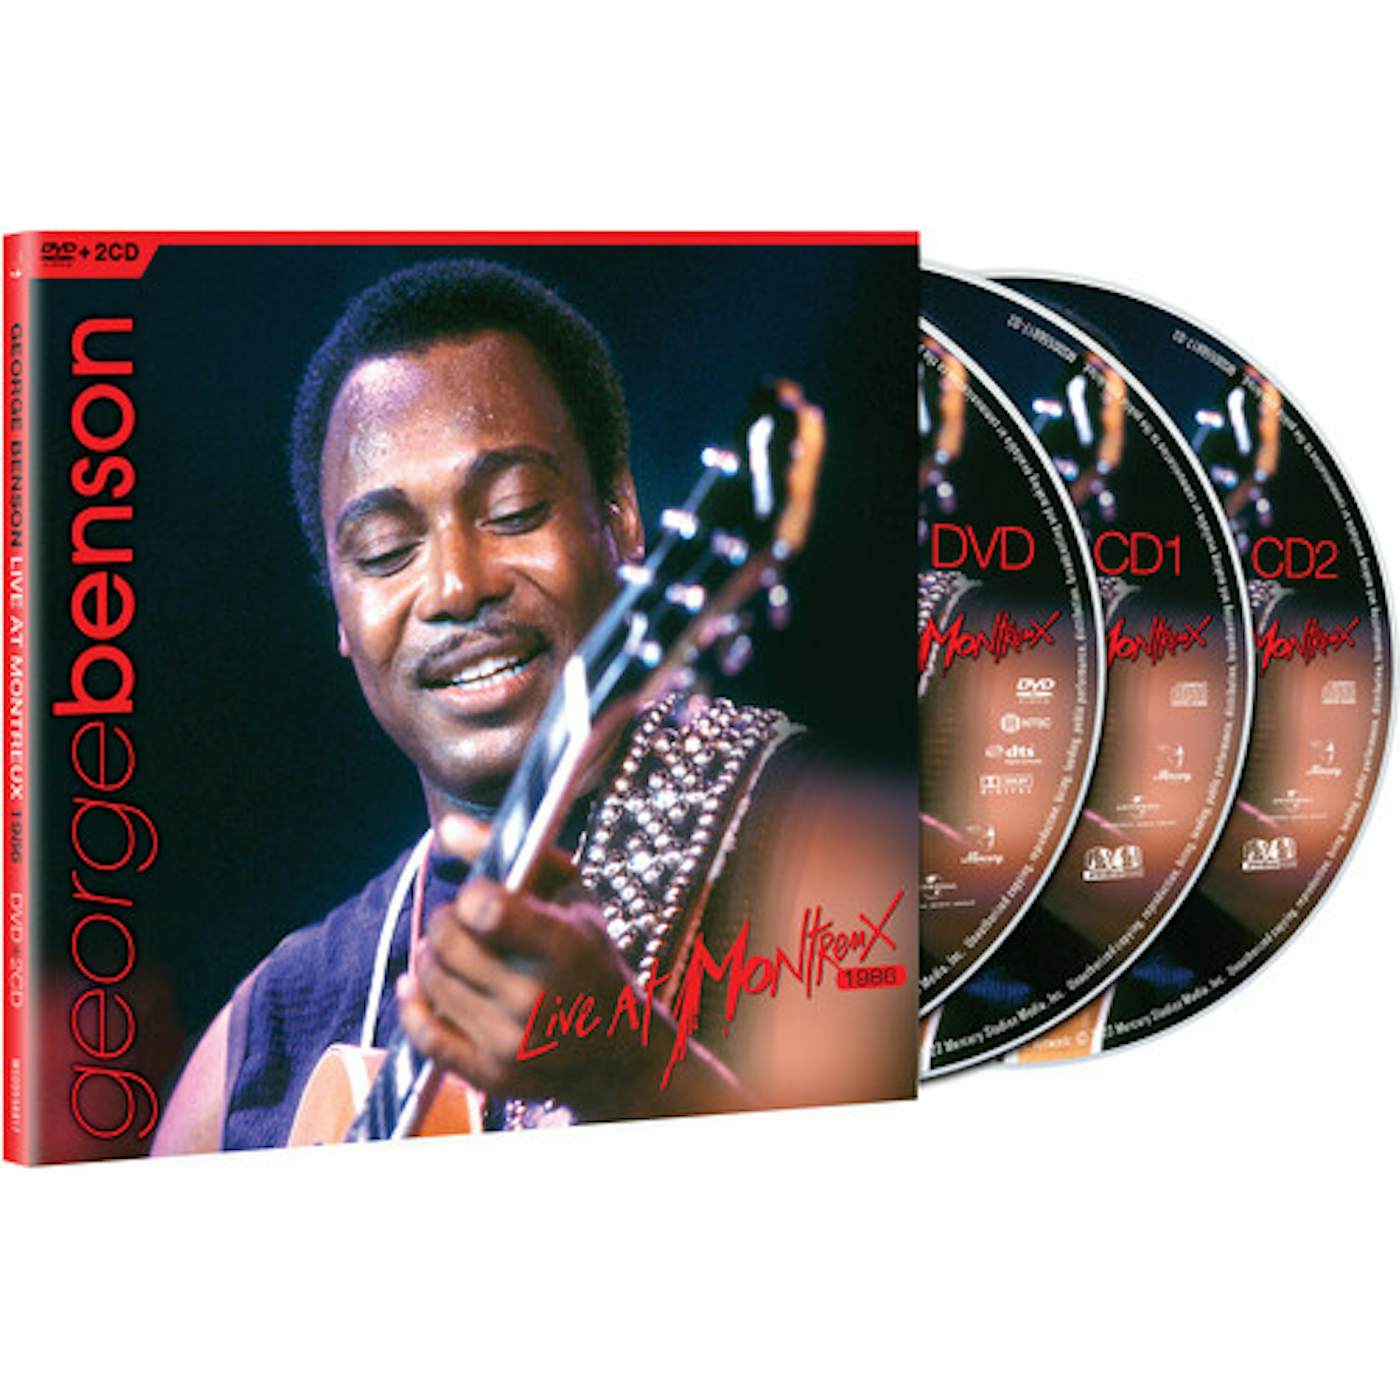 George Benson LIVE AT MONTREUX 1986 CD